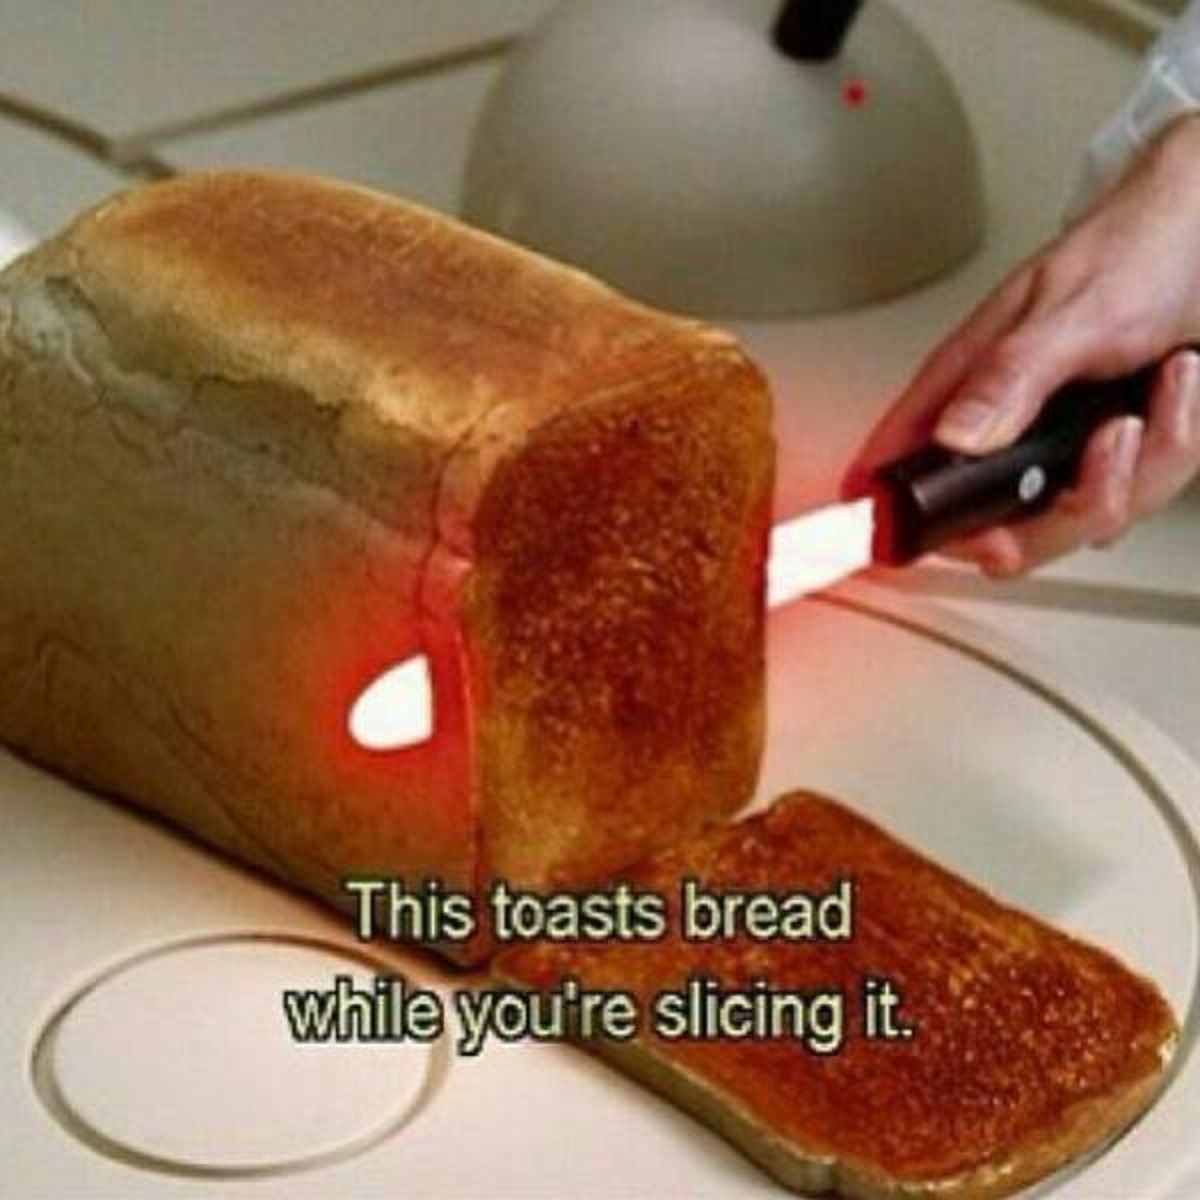 darth vader lightsaber meme - This toasts bread while you're slicing it.